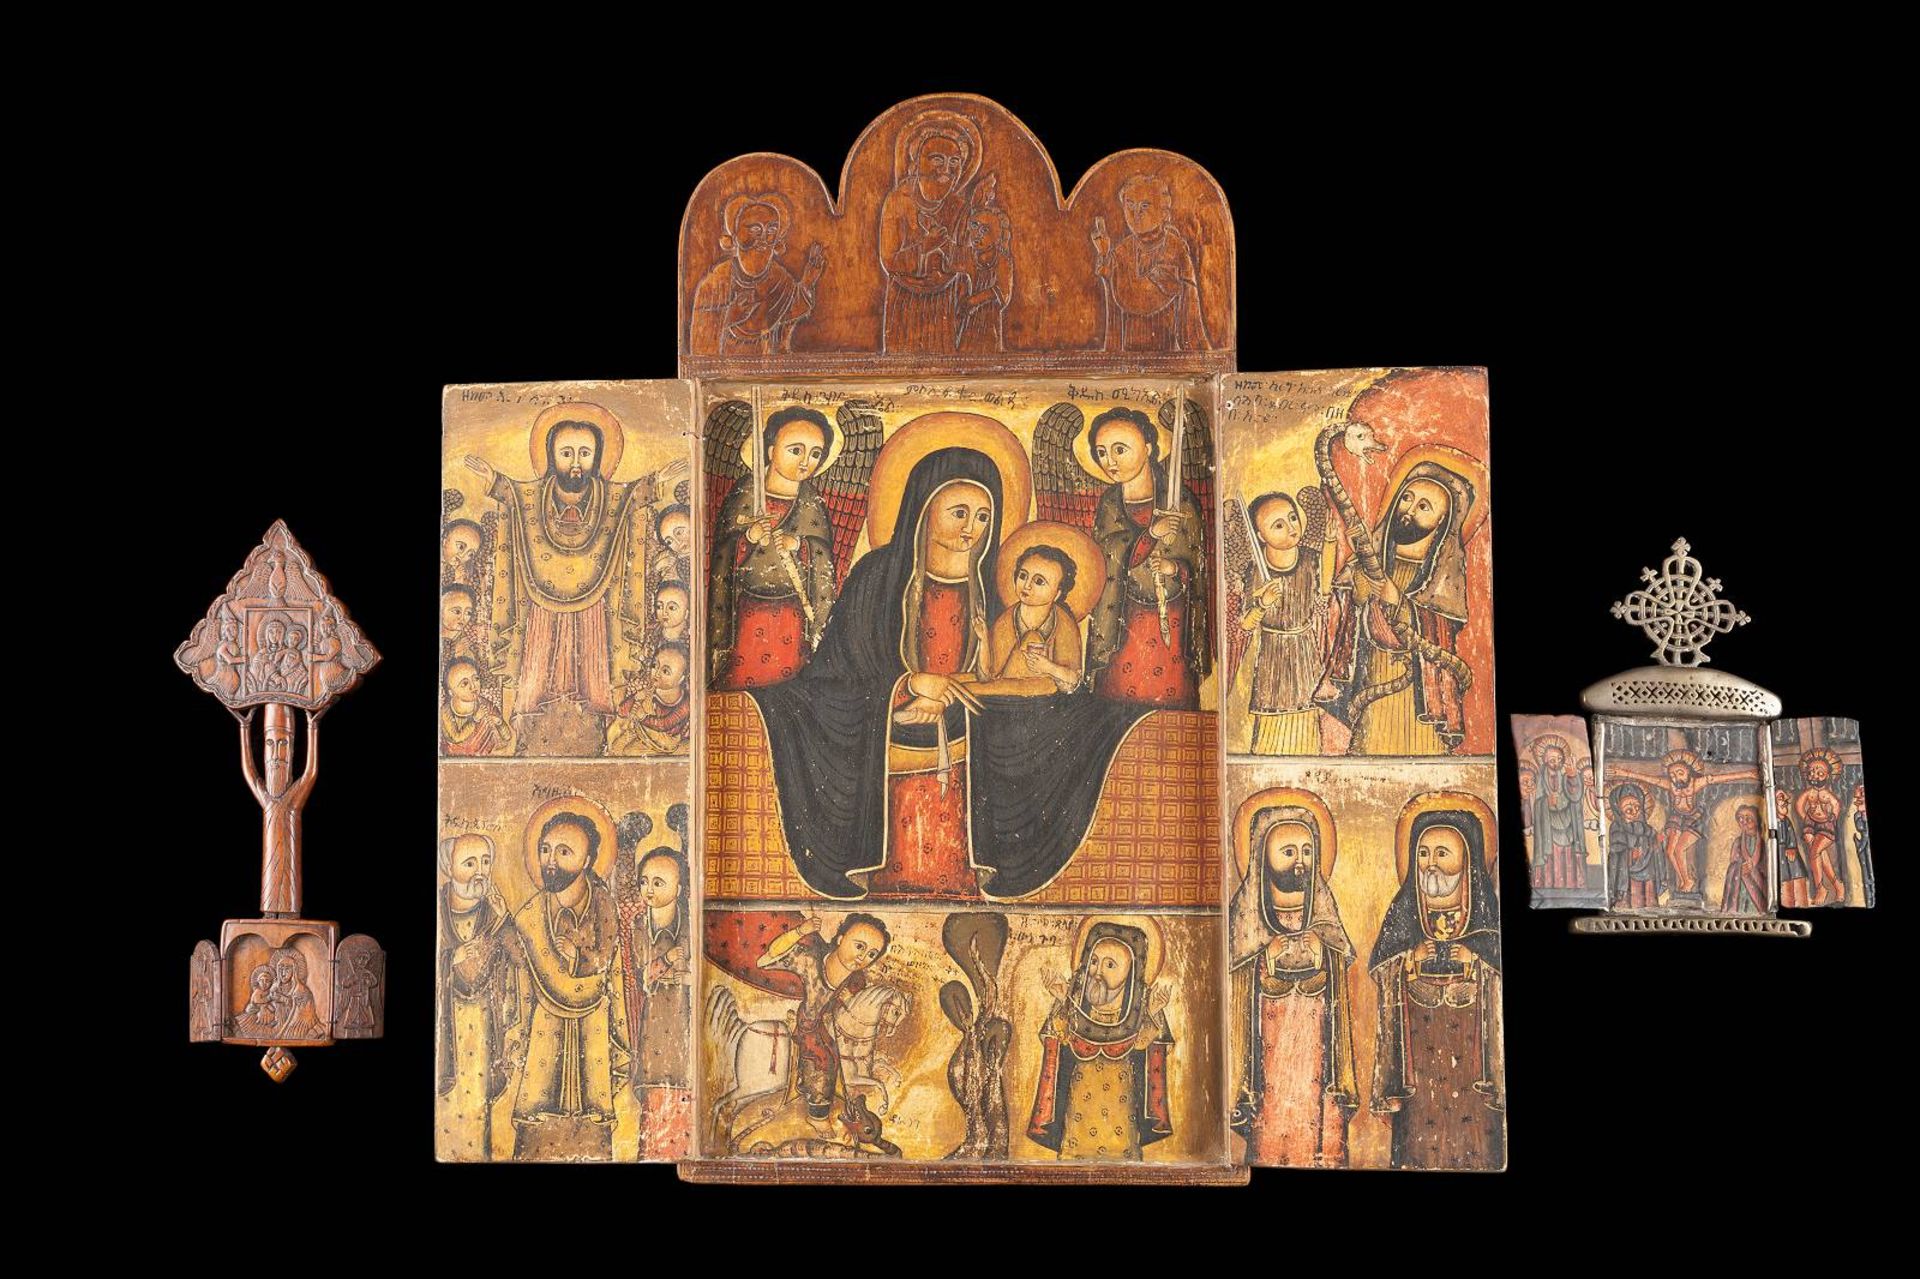 THREE COPTIC TRIPTYCHSEthiopian, 19th century Tempera on wood panels, carved. Comprising a large